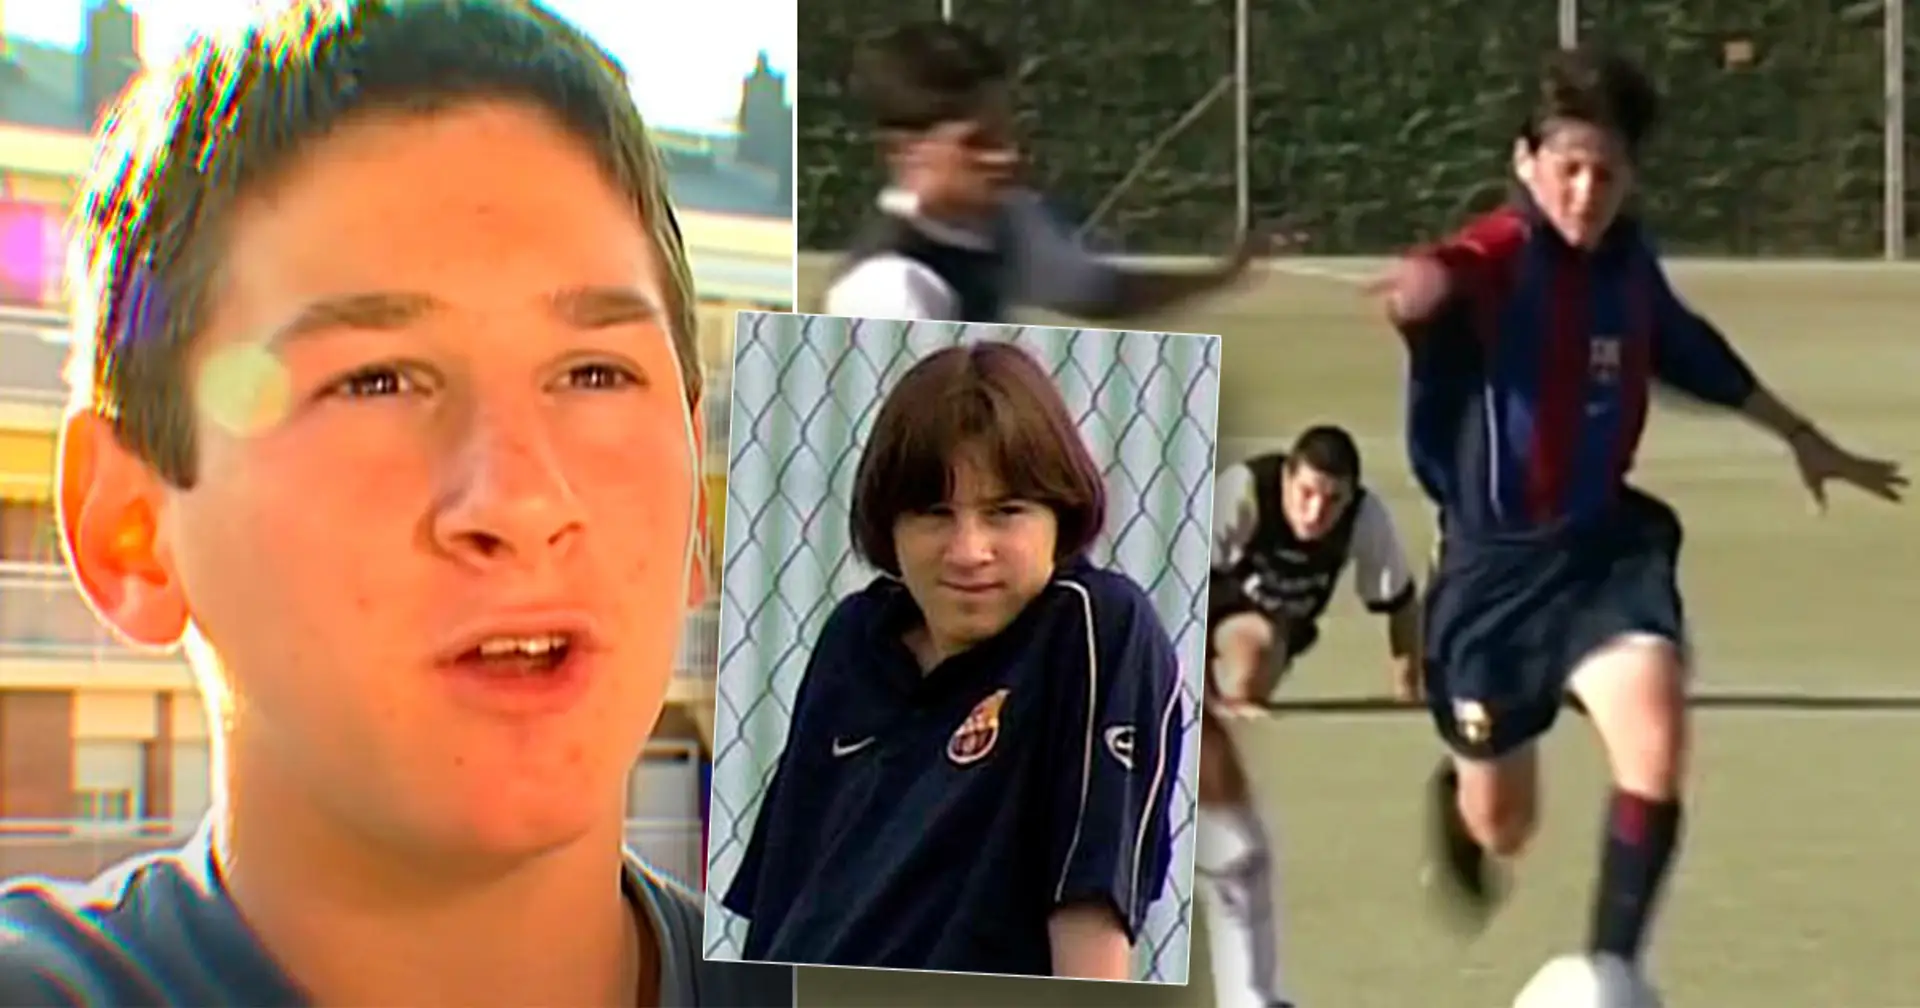 Guilty pleasure: How Messi's coach motivated him as a child to score more goals